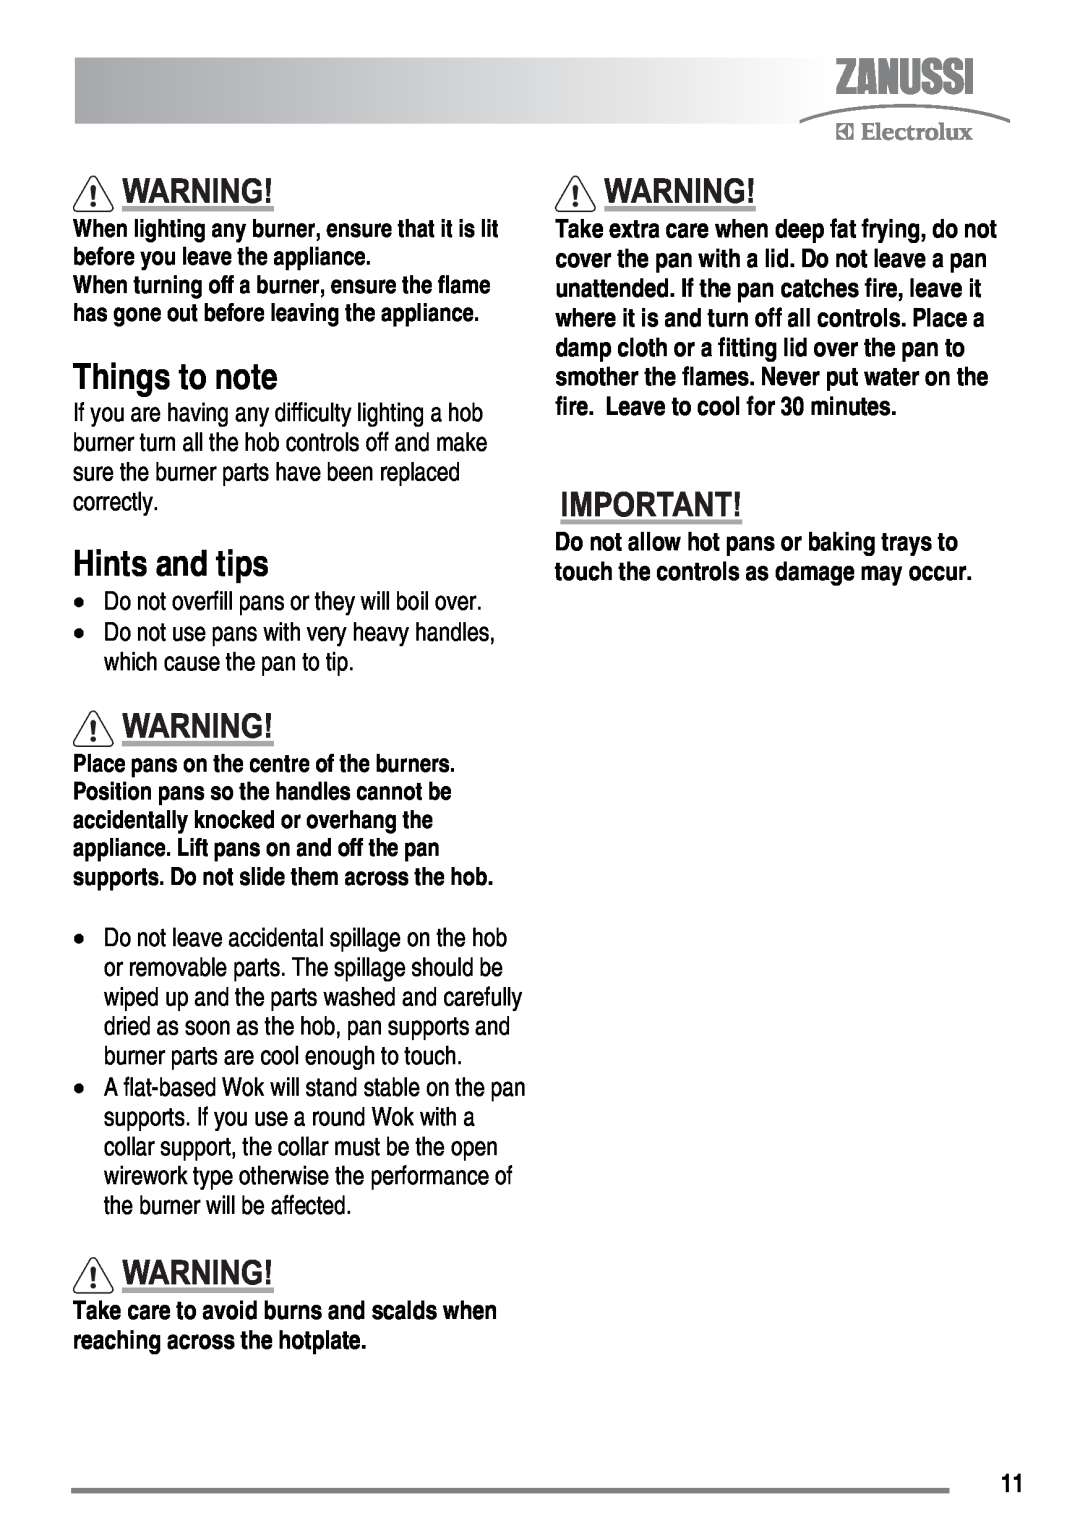 Zanussi ZKG6020 user manual Things to note, Hints and tips, Do not overfill pans or they will boil over 